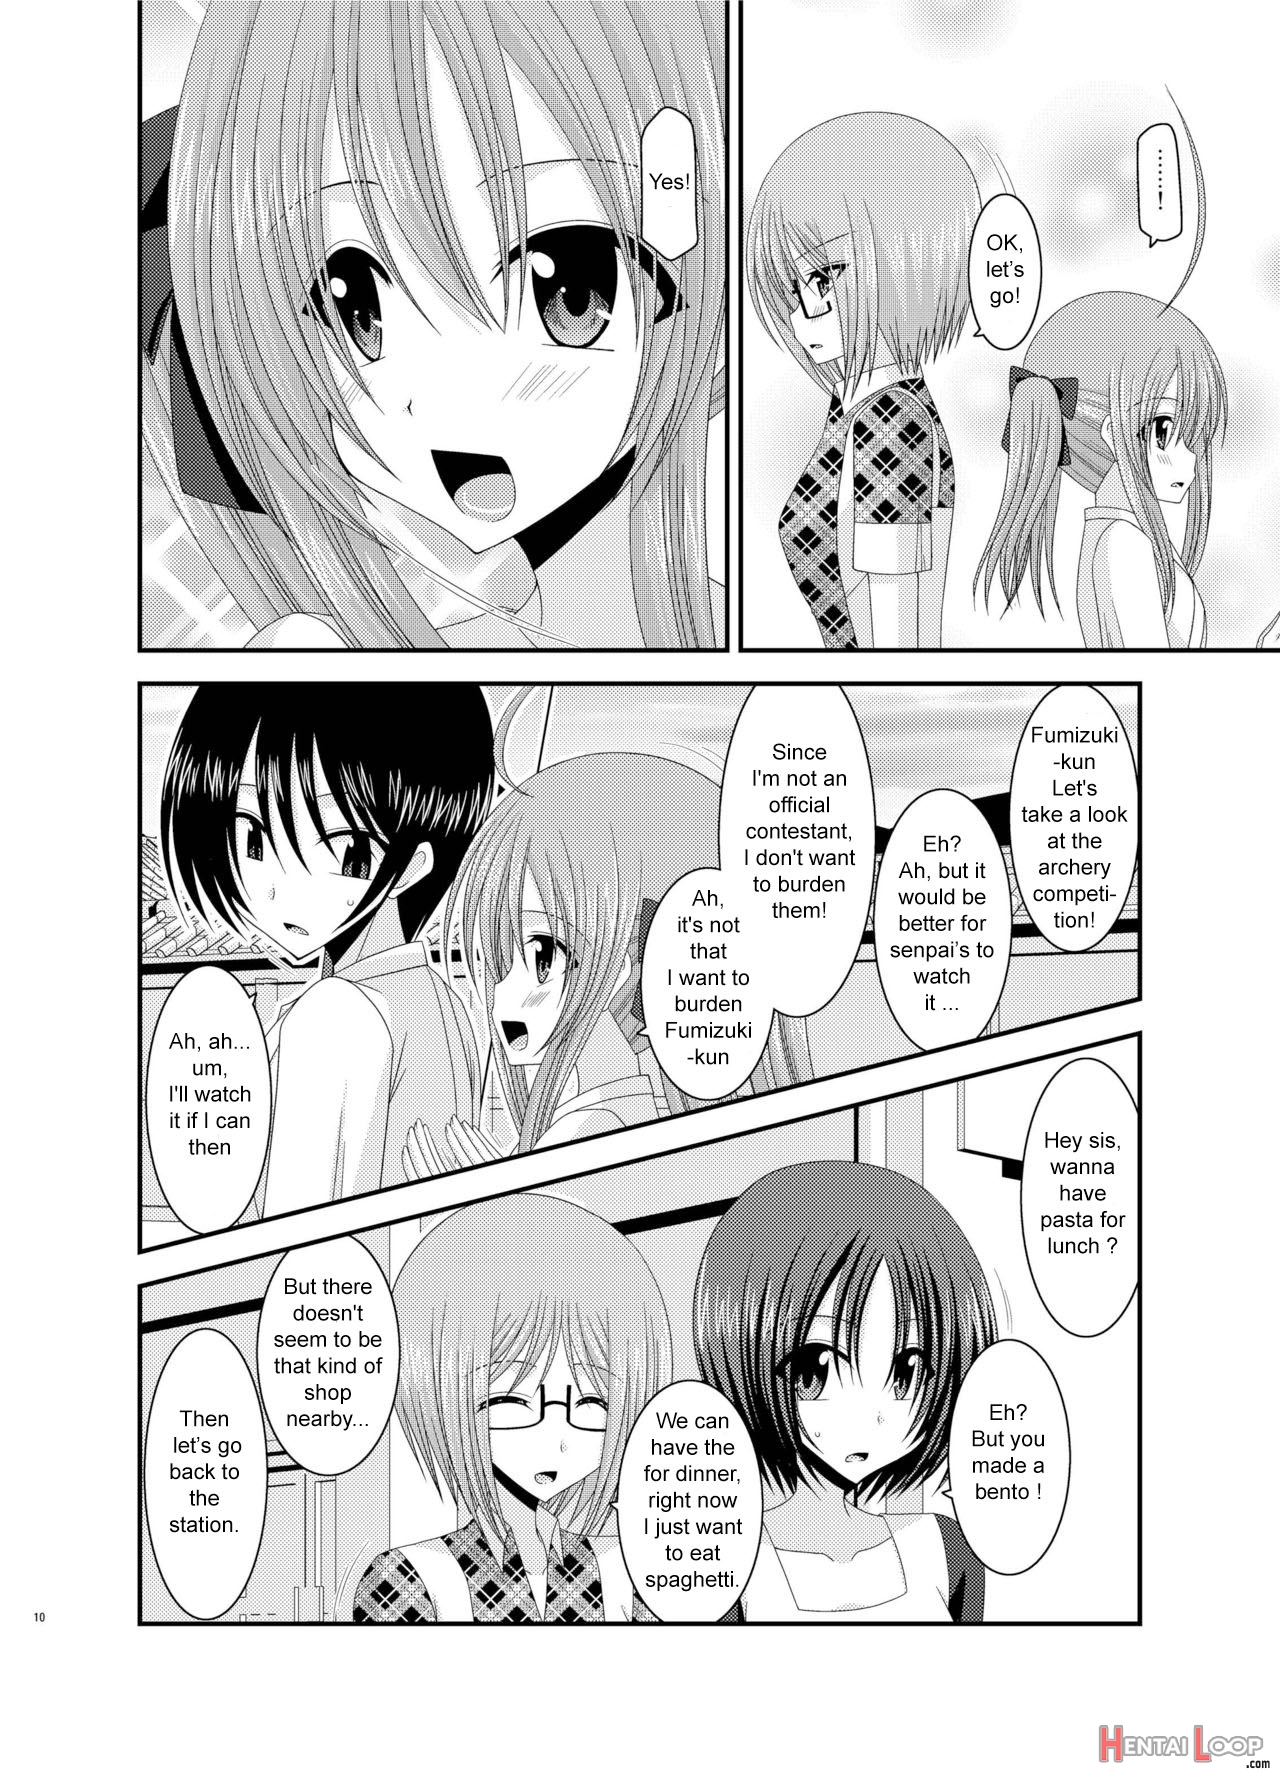 Exhibitionist Girl Diary Chapter 6 page 7